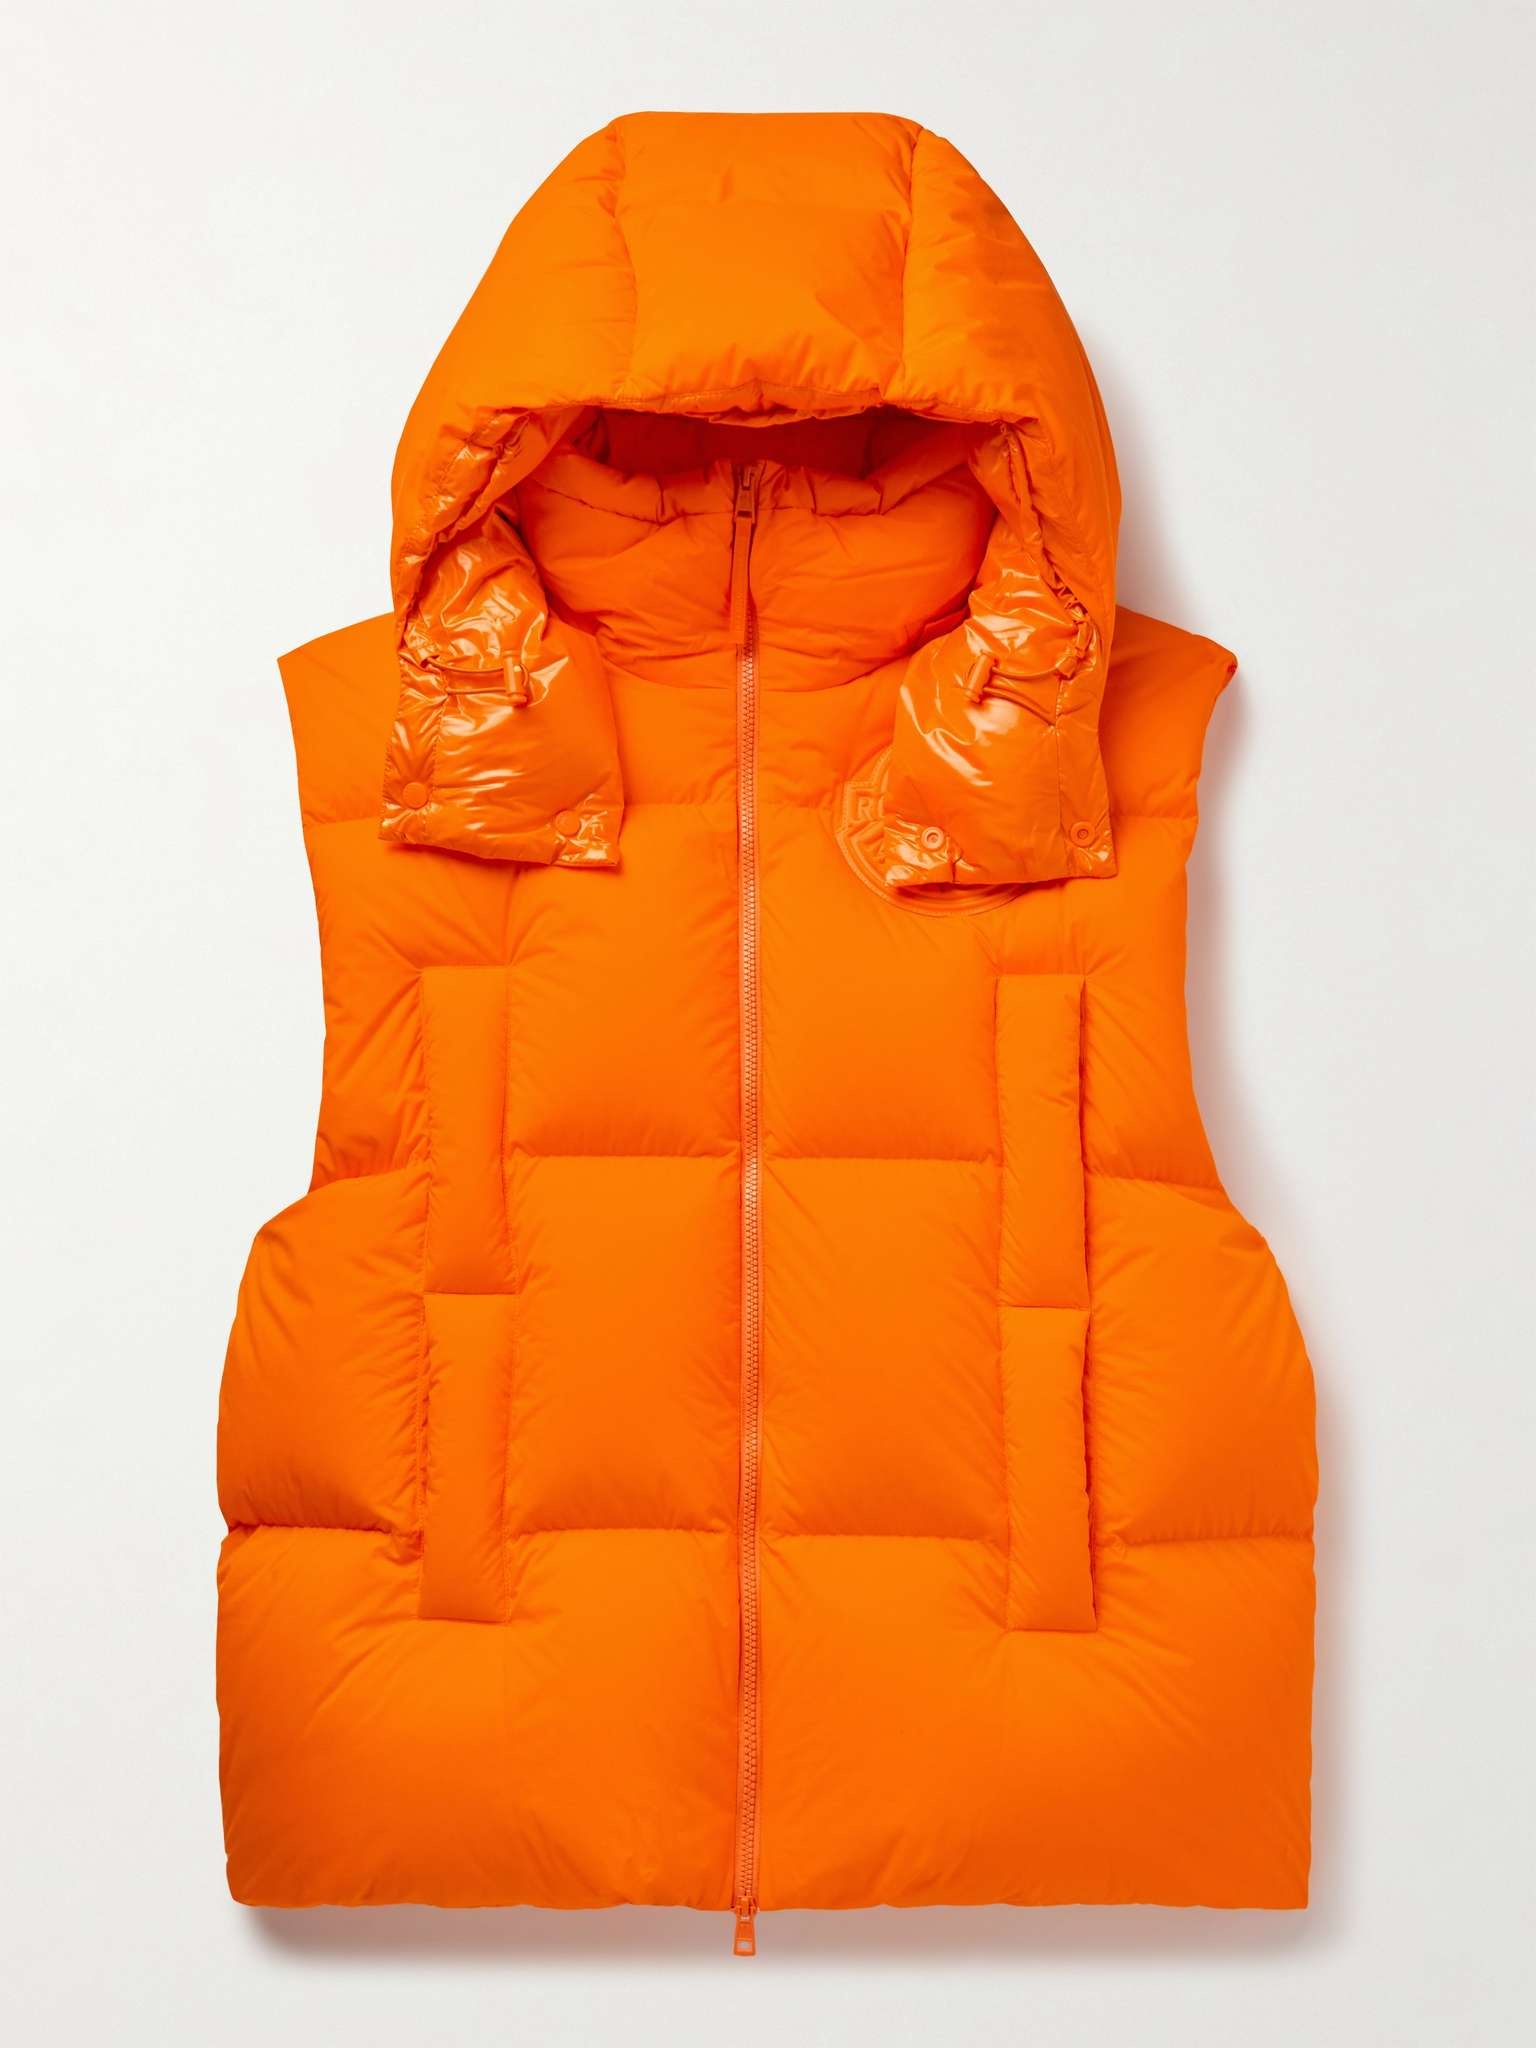 + Roc Nation by Jay-Z Apus Oversized Quilted Shell Hooded Down Gilet - 1